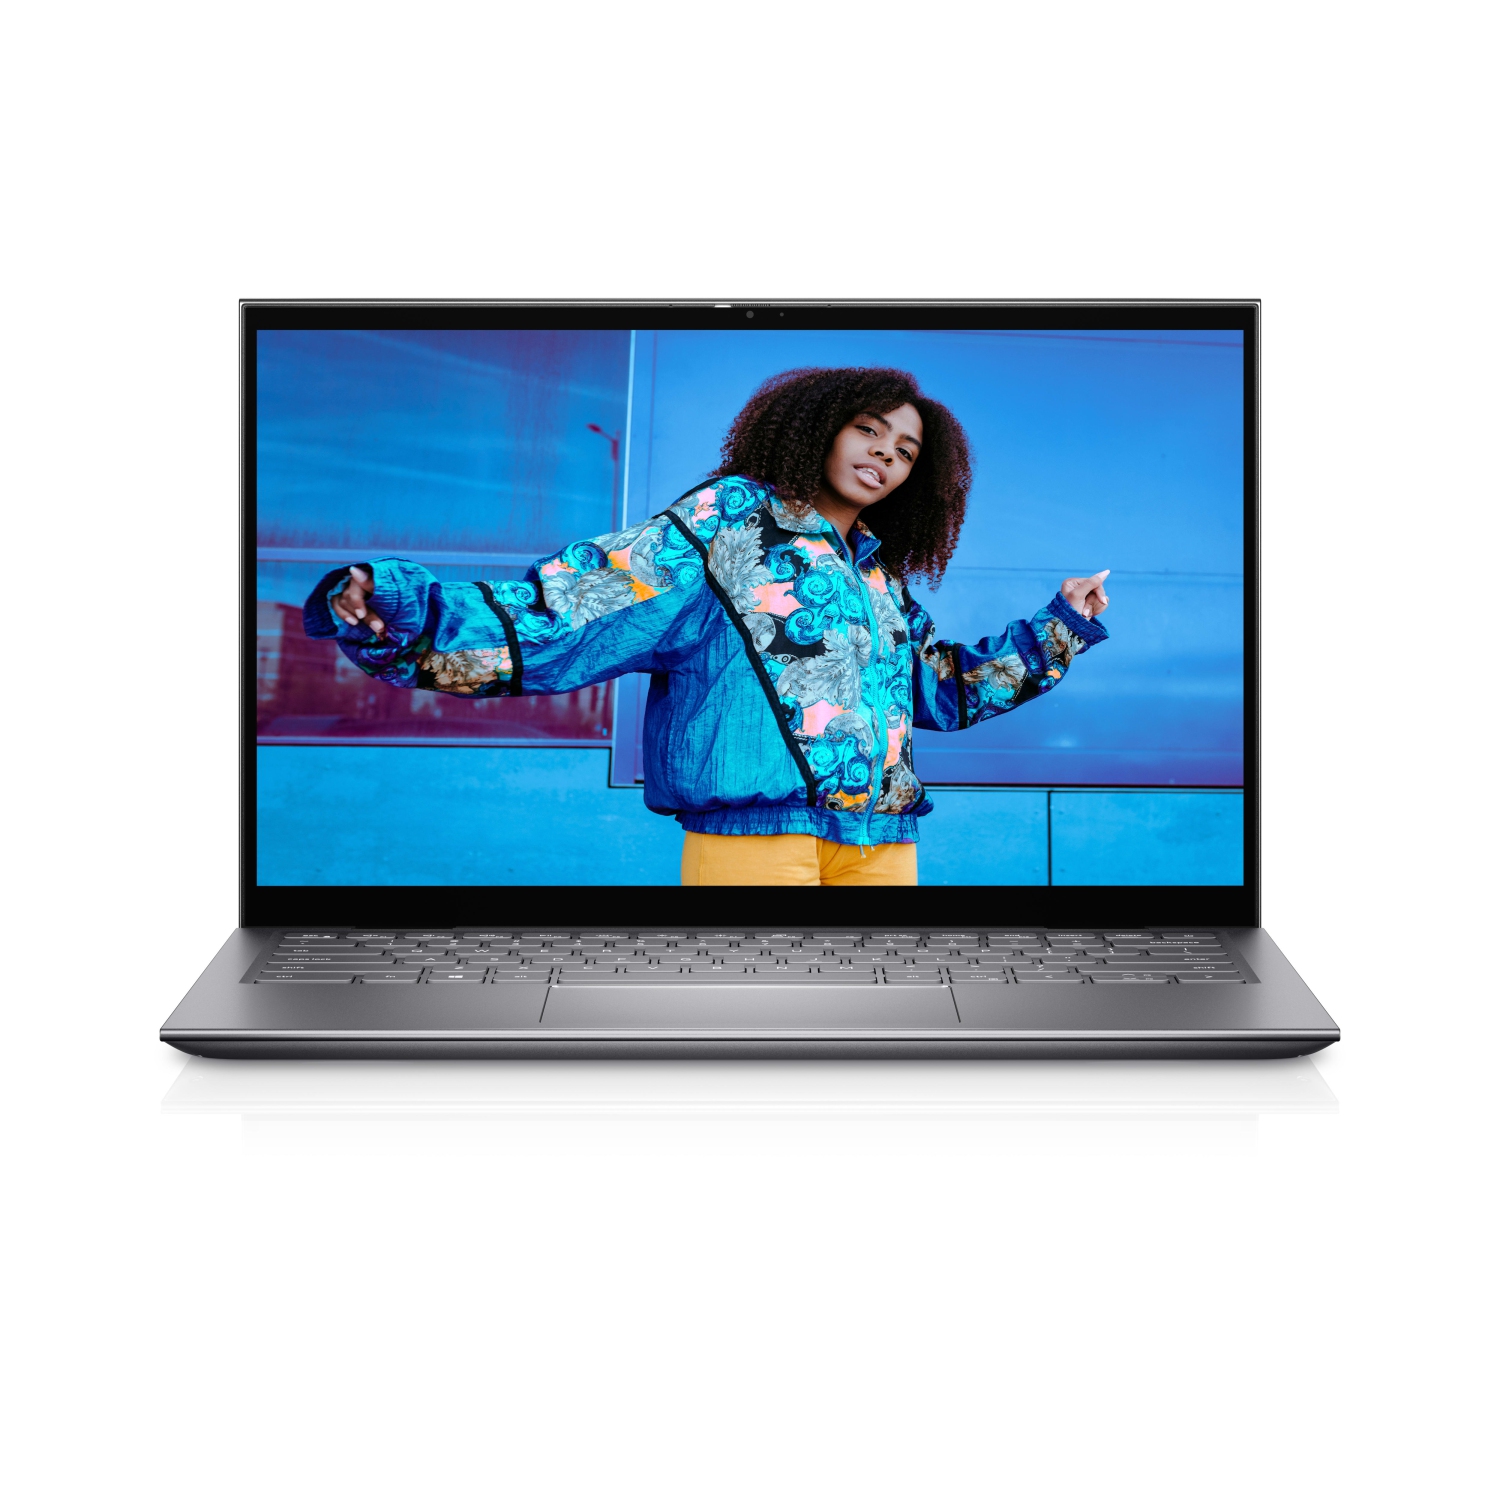 Refurbished (Excellent) – Dell Inspiron 5410 2-in-1 (2021) | 14" FHD Touch | Core i5 - 512GB SSD - 8GB RAM | 4 Cores @ 4.5 GHz - 11th Gen CPU